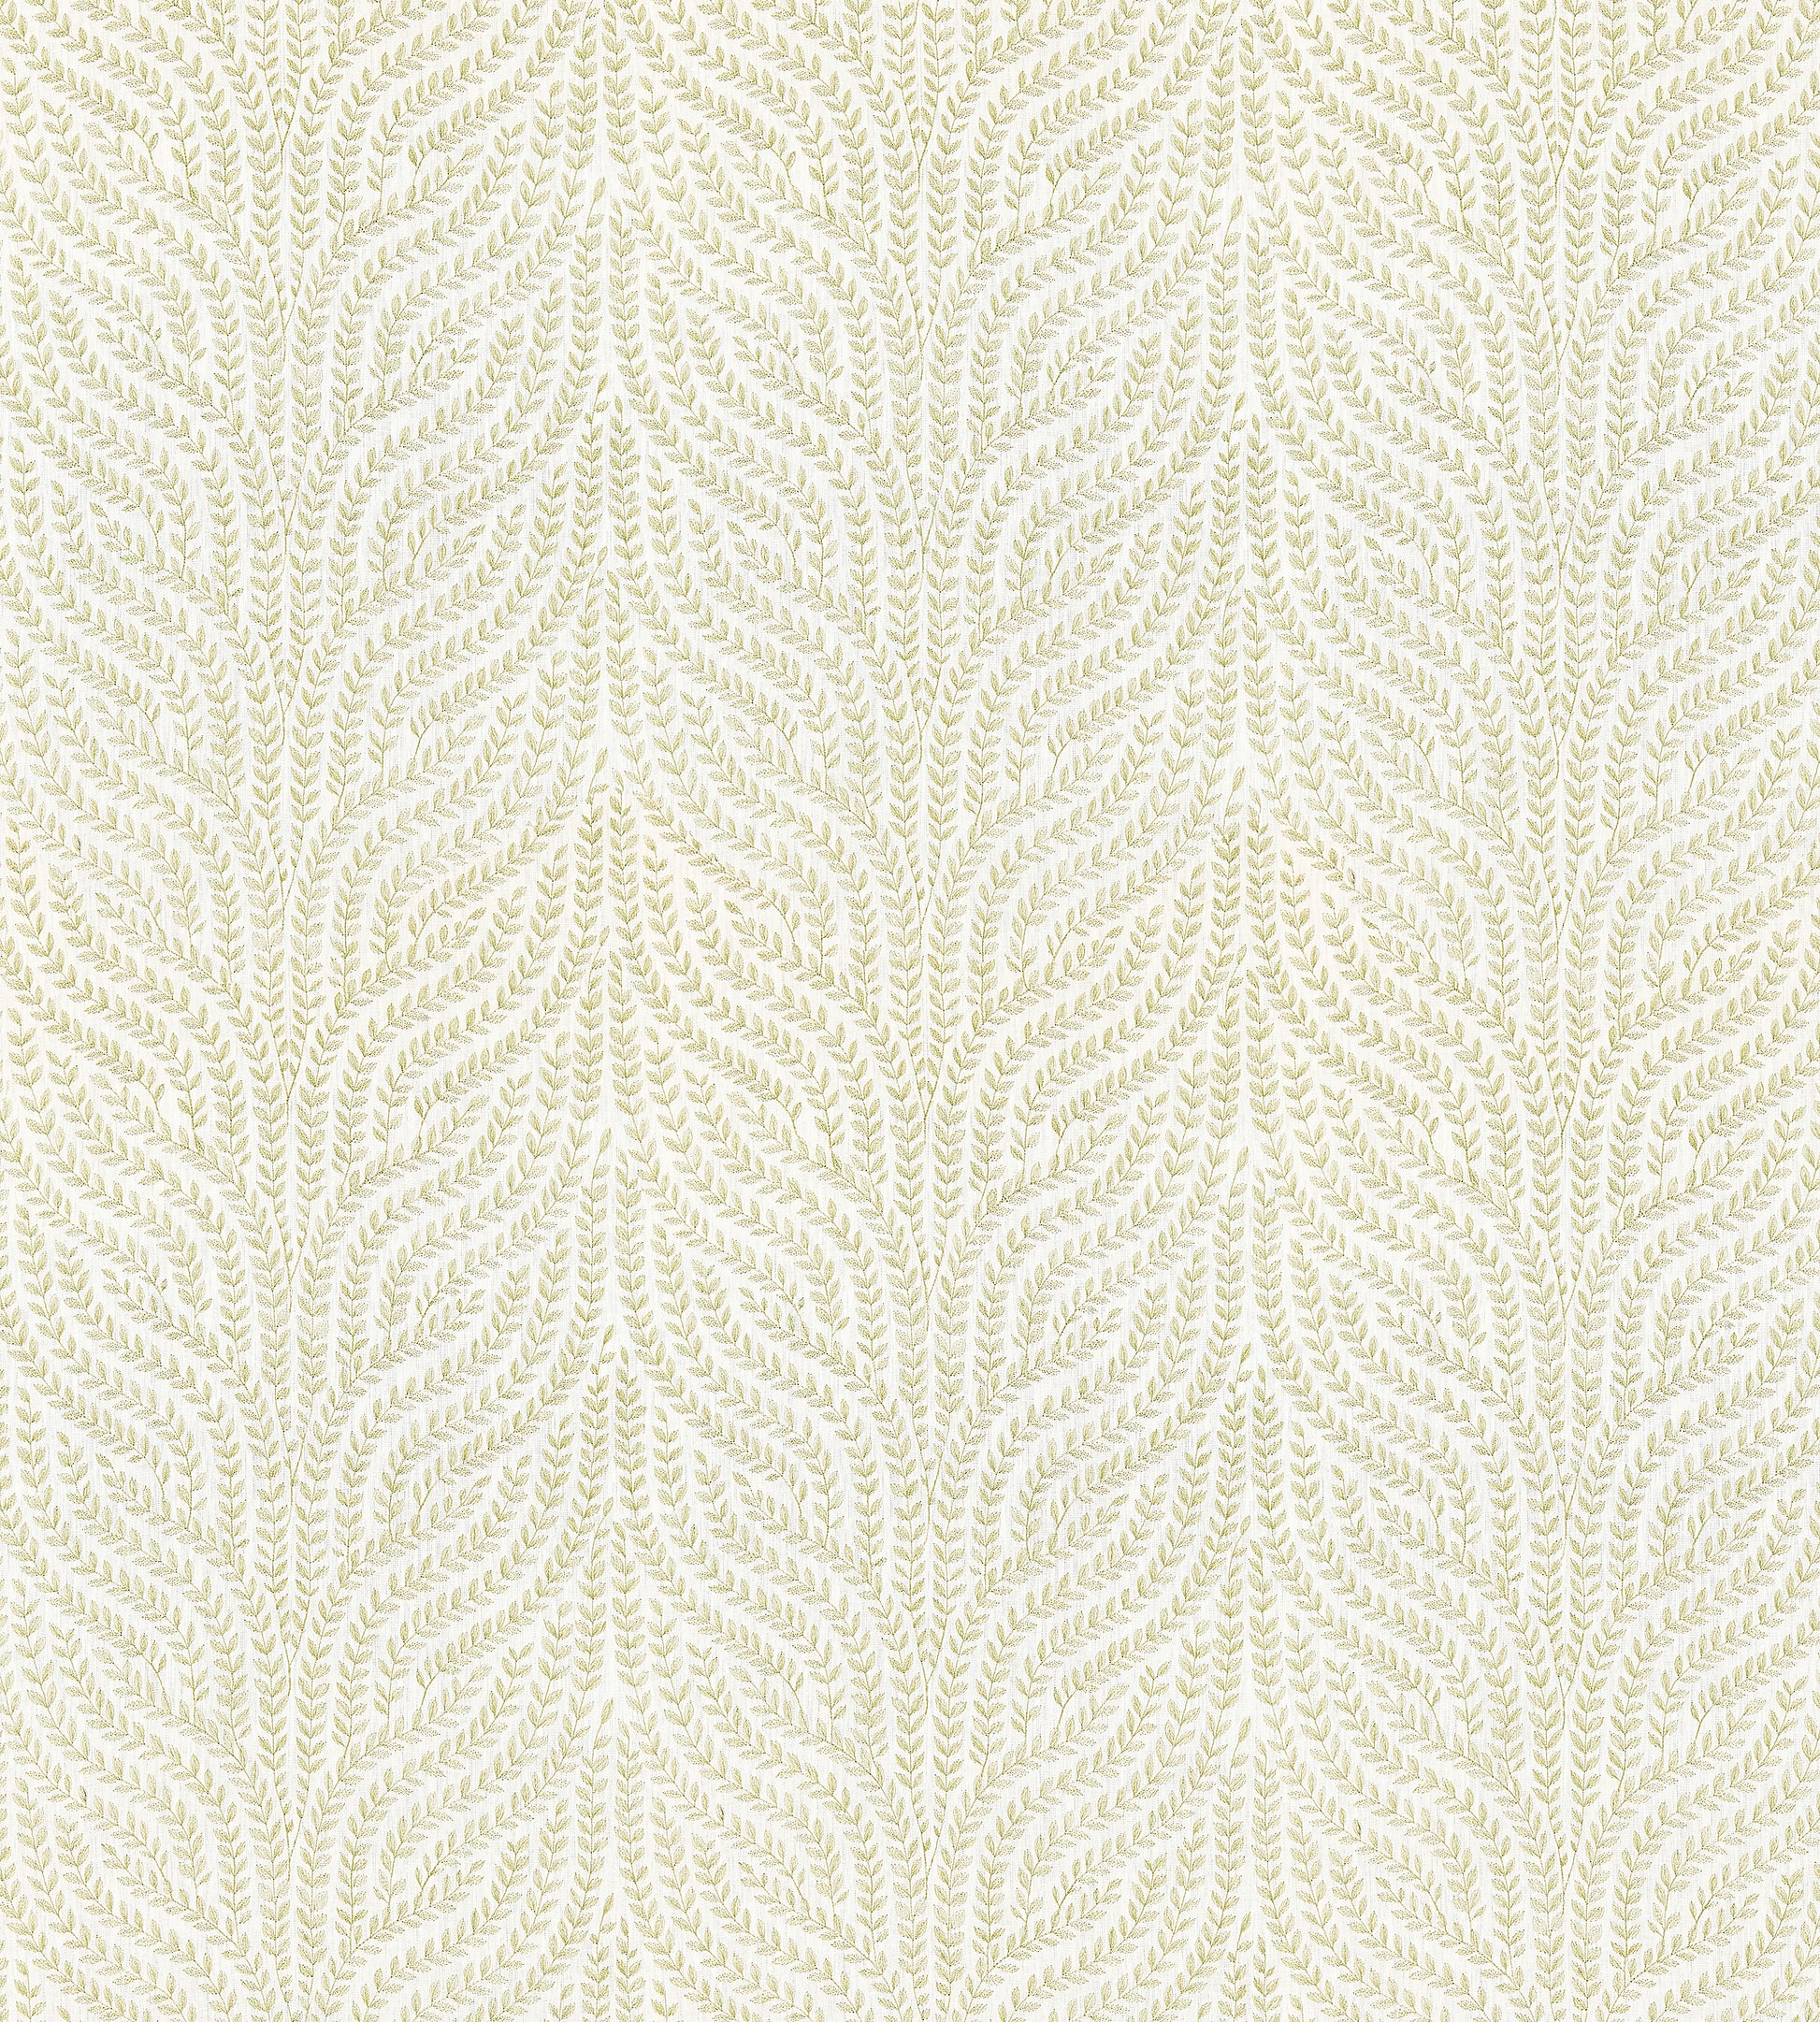 Purchase Scalamandre Fabric SKU SC 000227125, Willow Vine Embroidery Celery 3